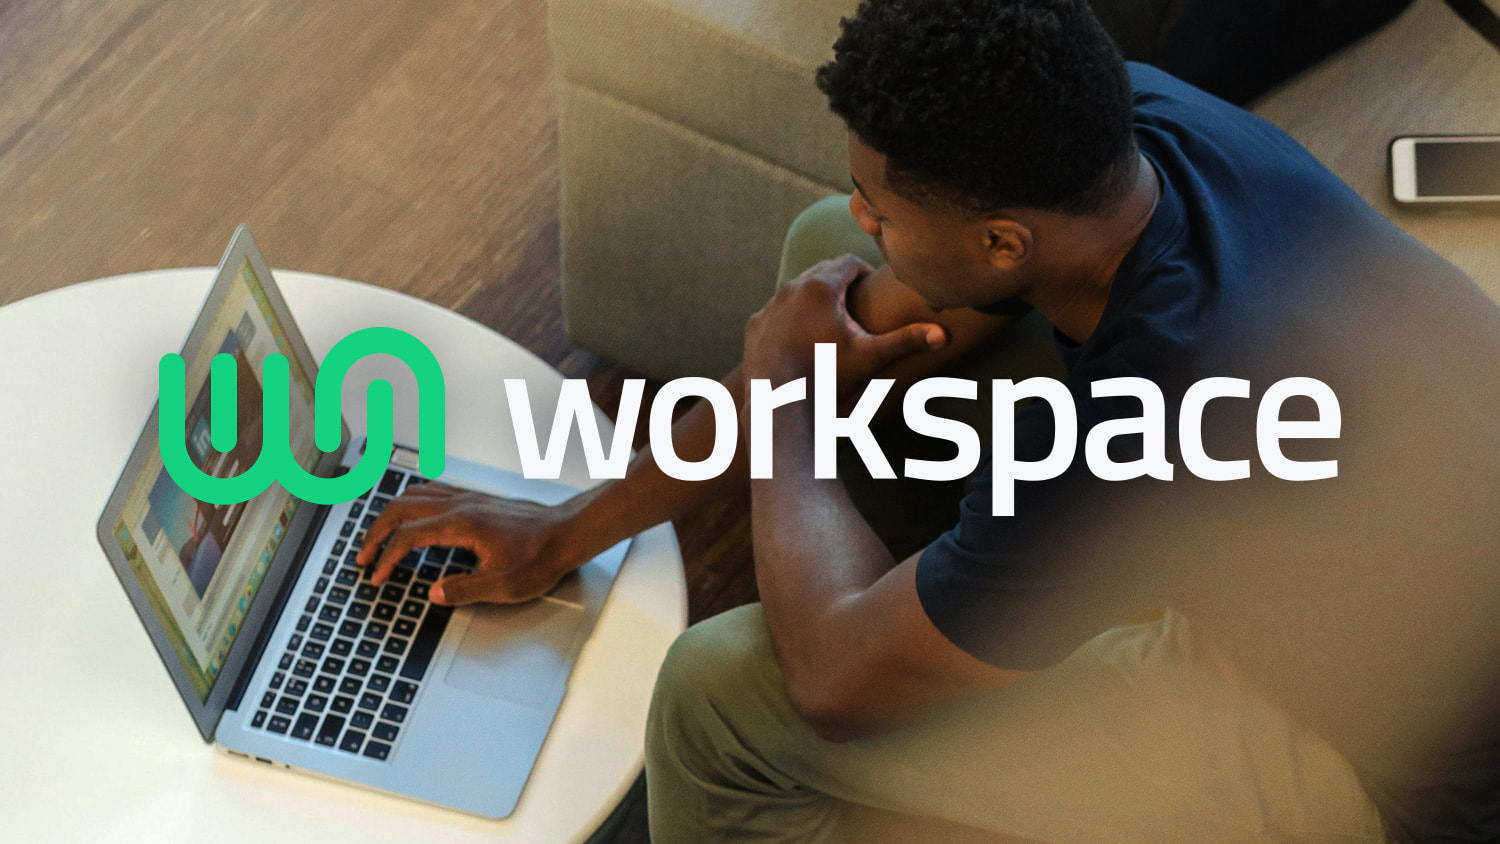 Cowork Workspace horizontal logo displayed over man sitting on a sofa browsing the web on a laptop